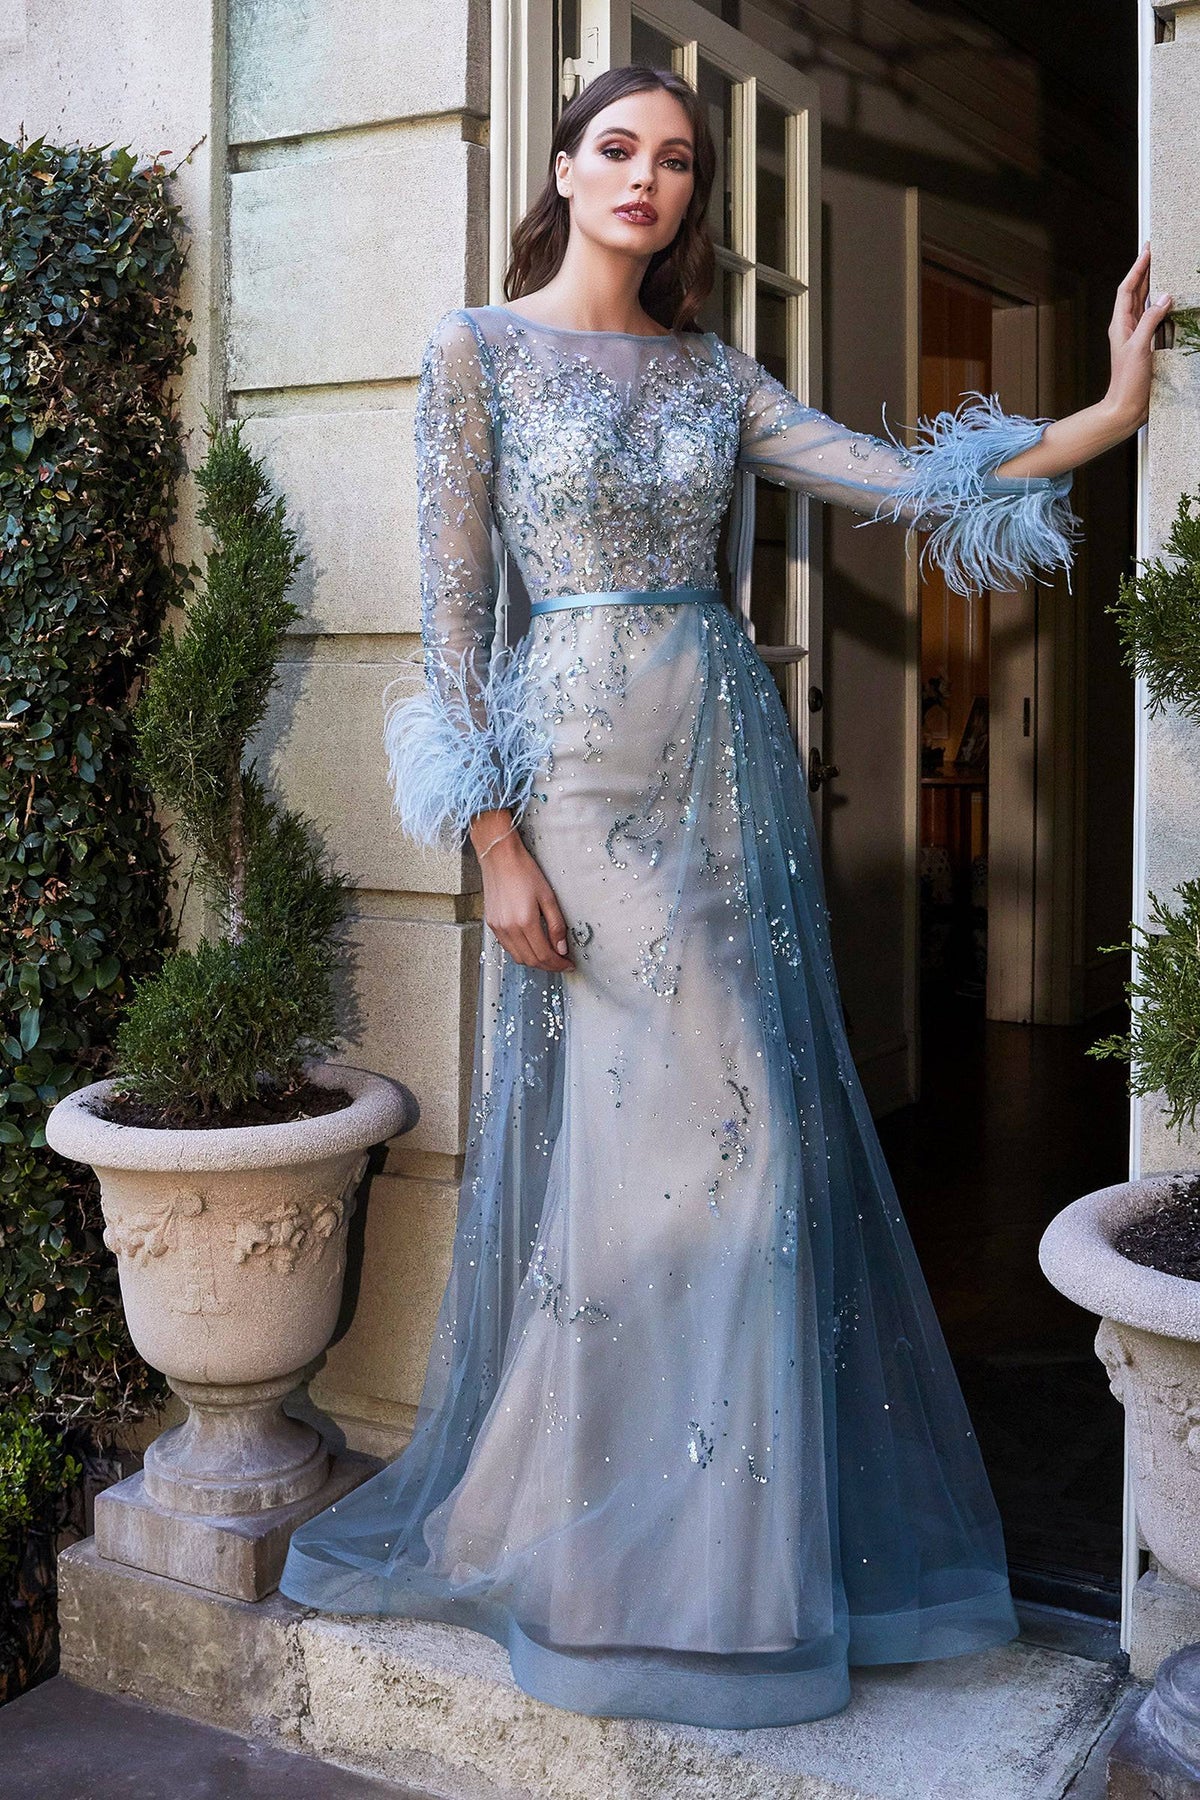 Pretty Long Dress With Sheer Overlay and Feather Accents on Sleeves #CDB716 - NORMA REED